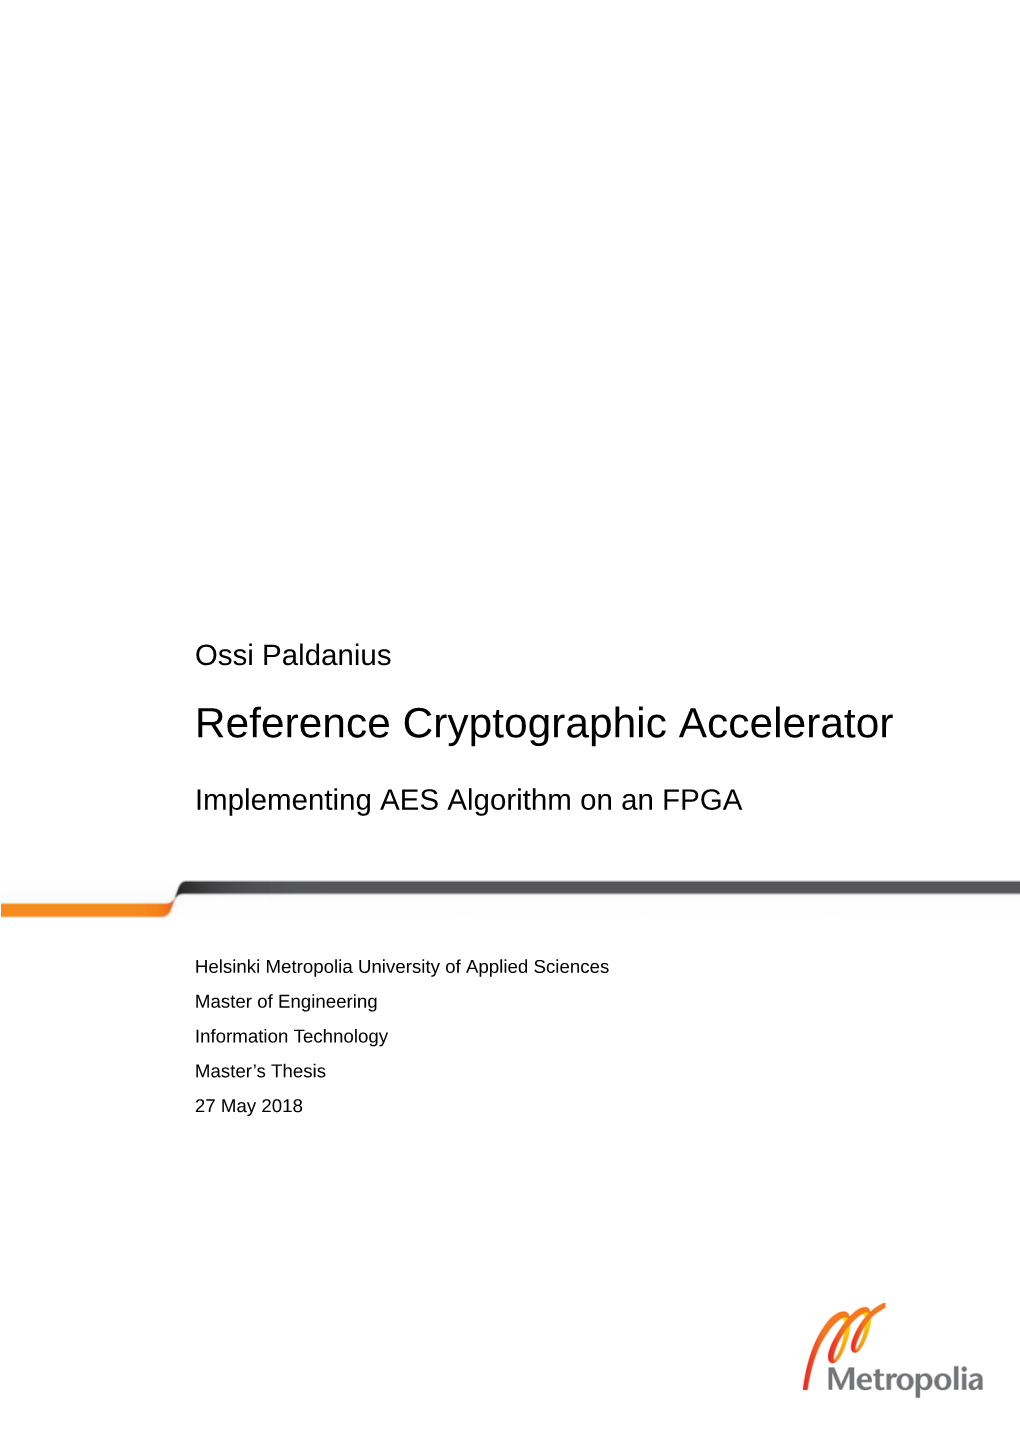 Reference Cryptographic Accelerator